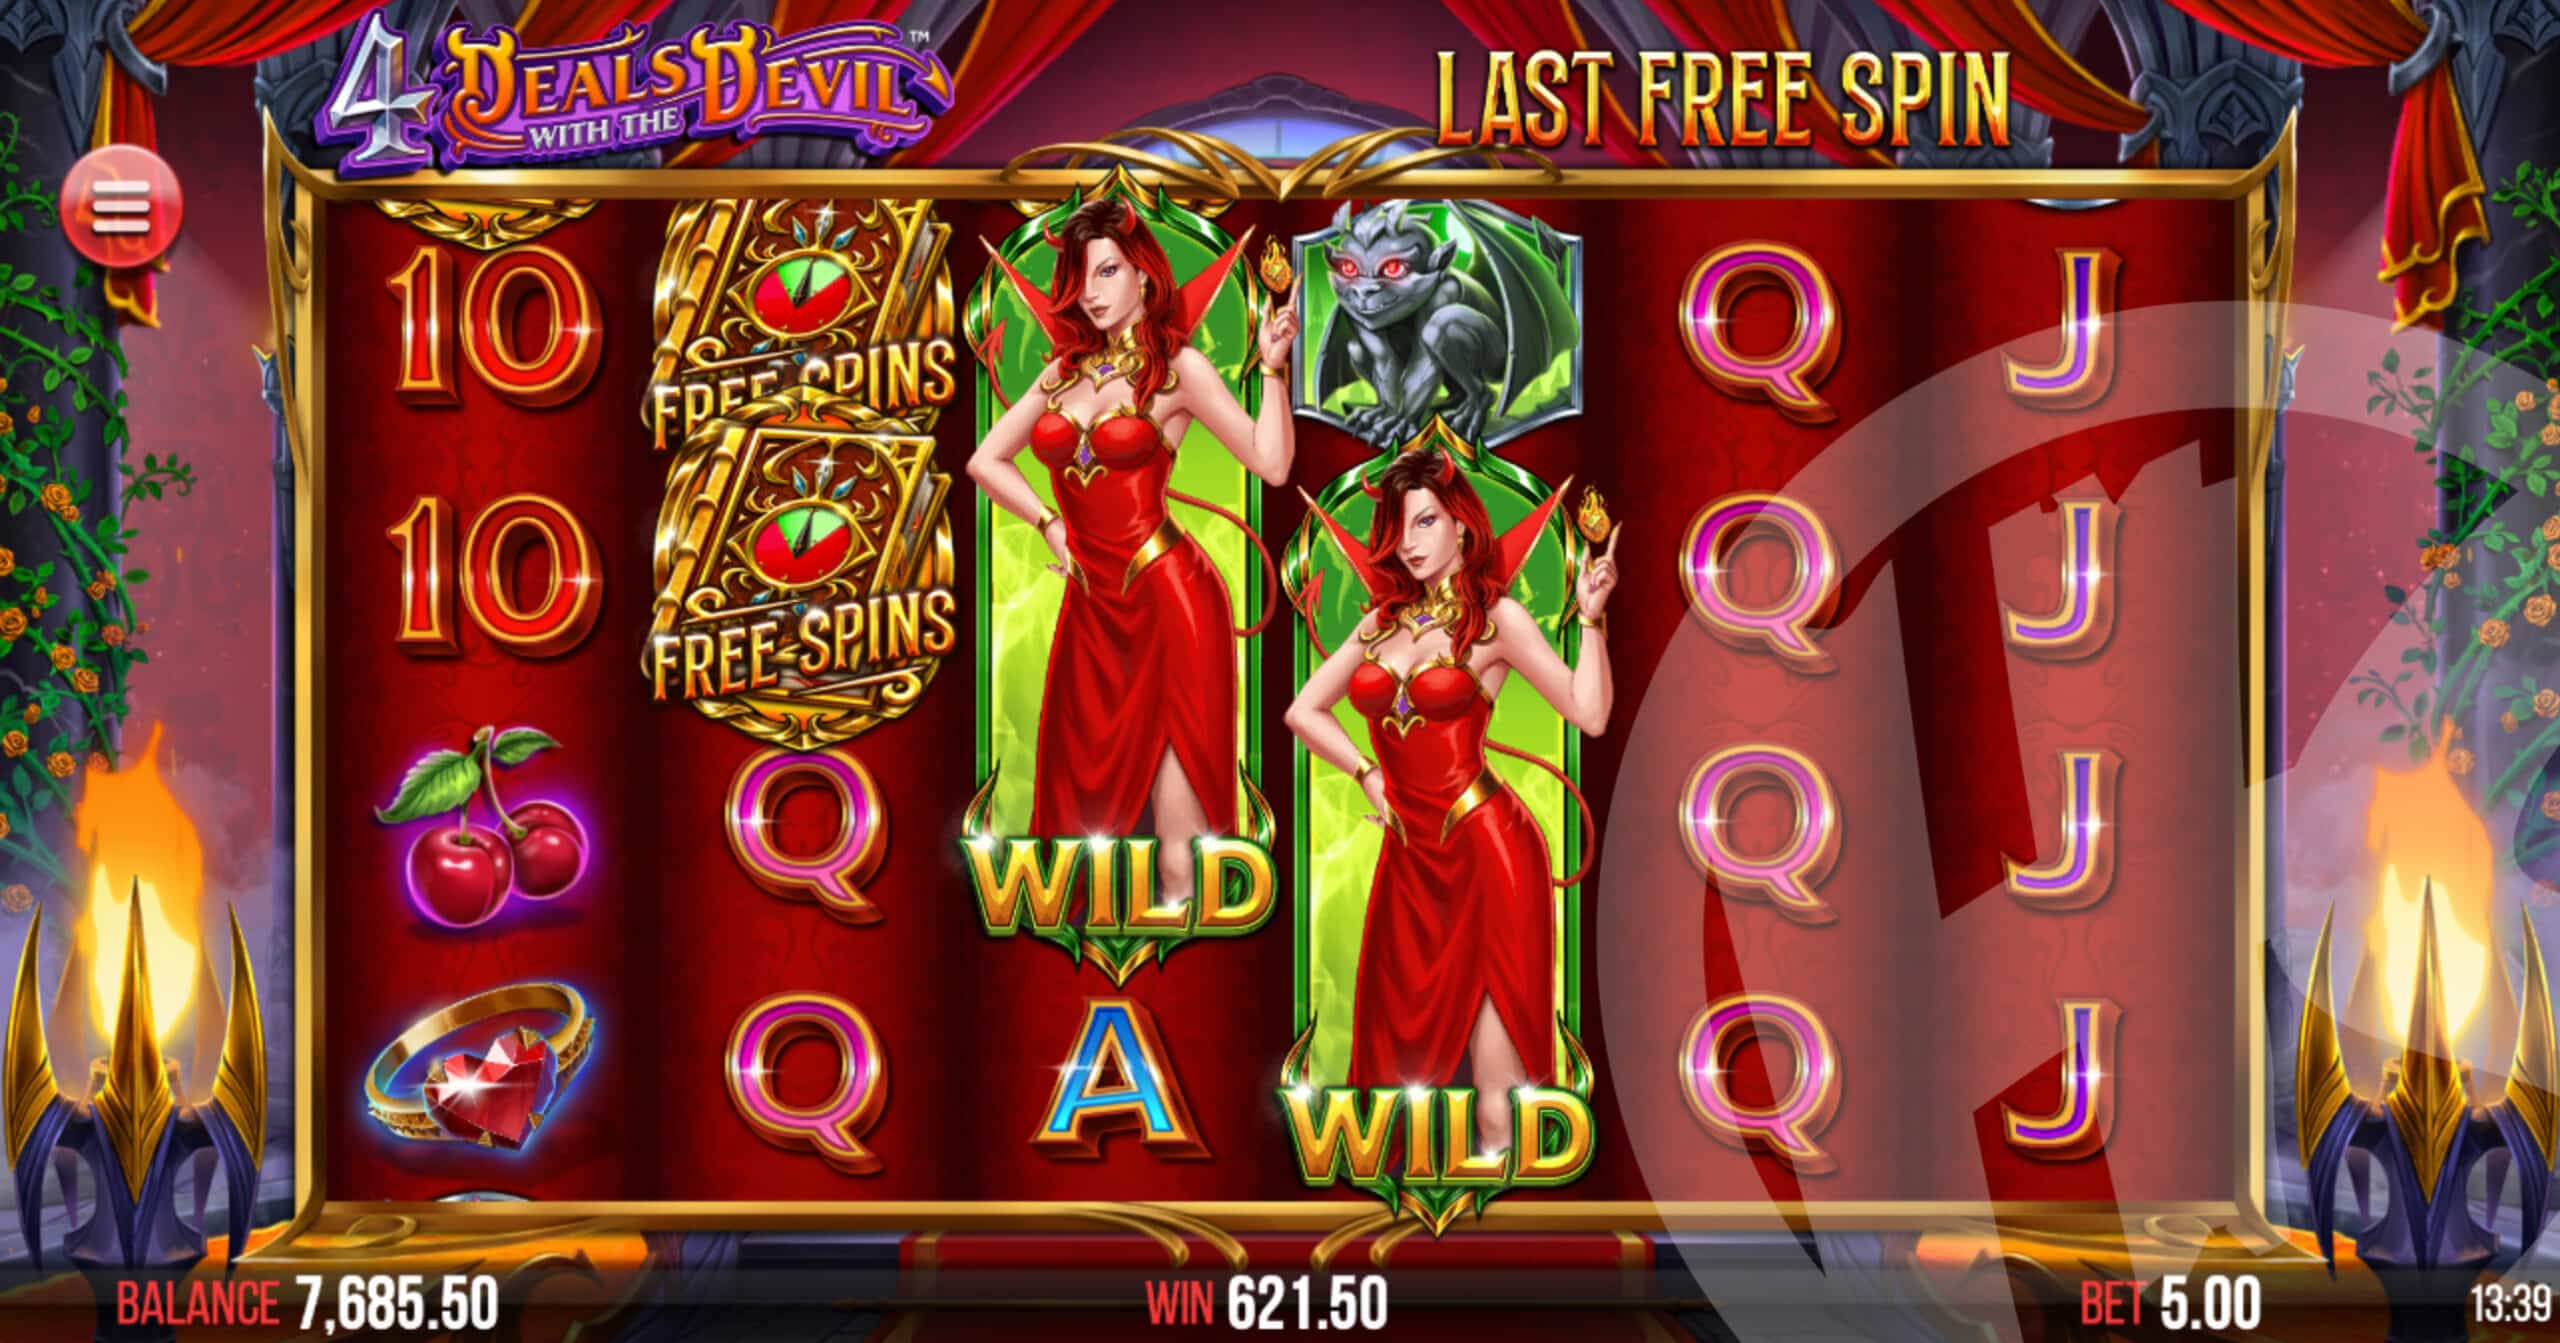 4 Deals With The Devil Medium Free Spins